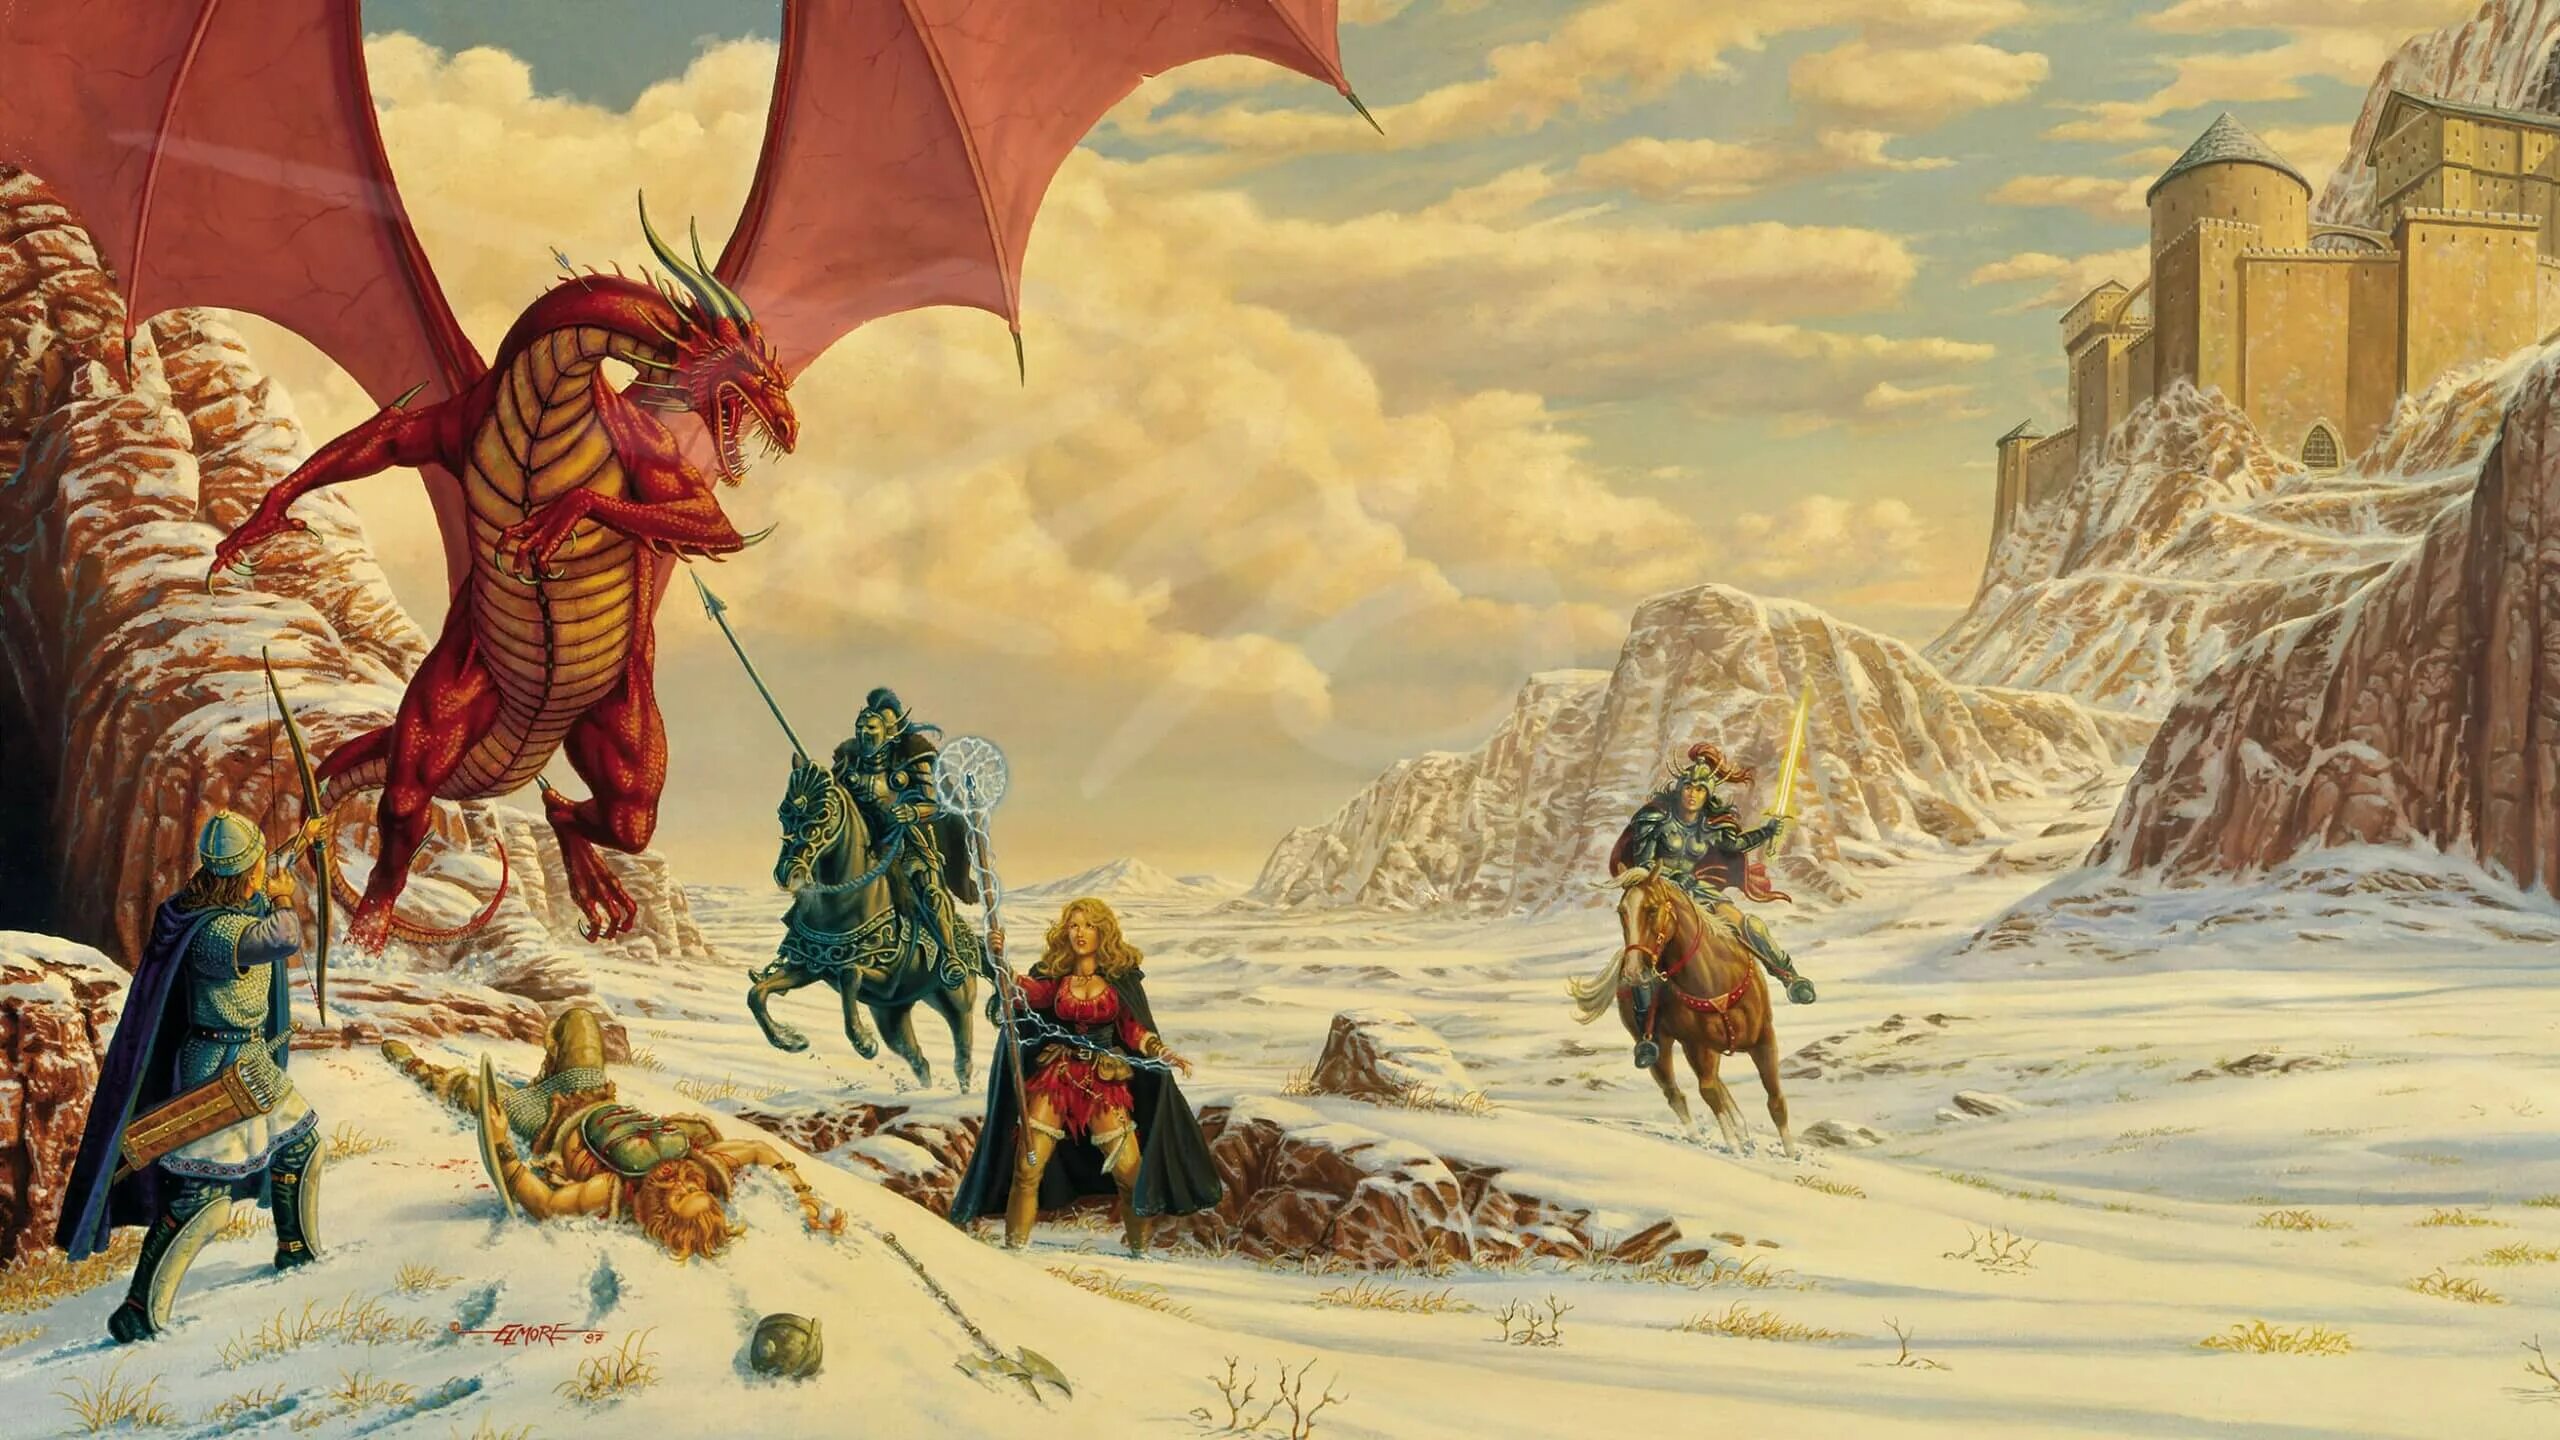 Ларри Элмор Dragonlance. Might and Magic 6 the mandate of Heaven. Might and Magic 6 the mandate of Heaven Art. Ларри Элмор картины.